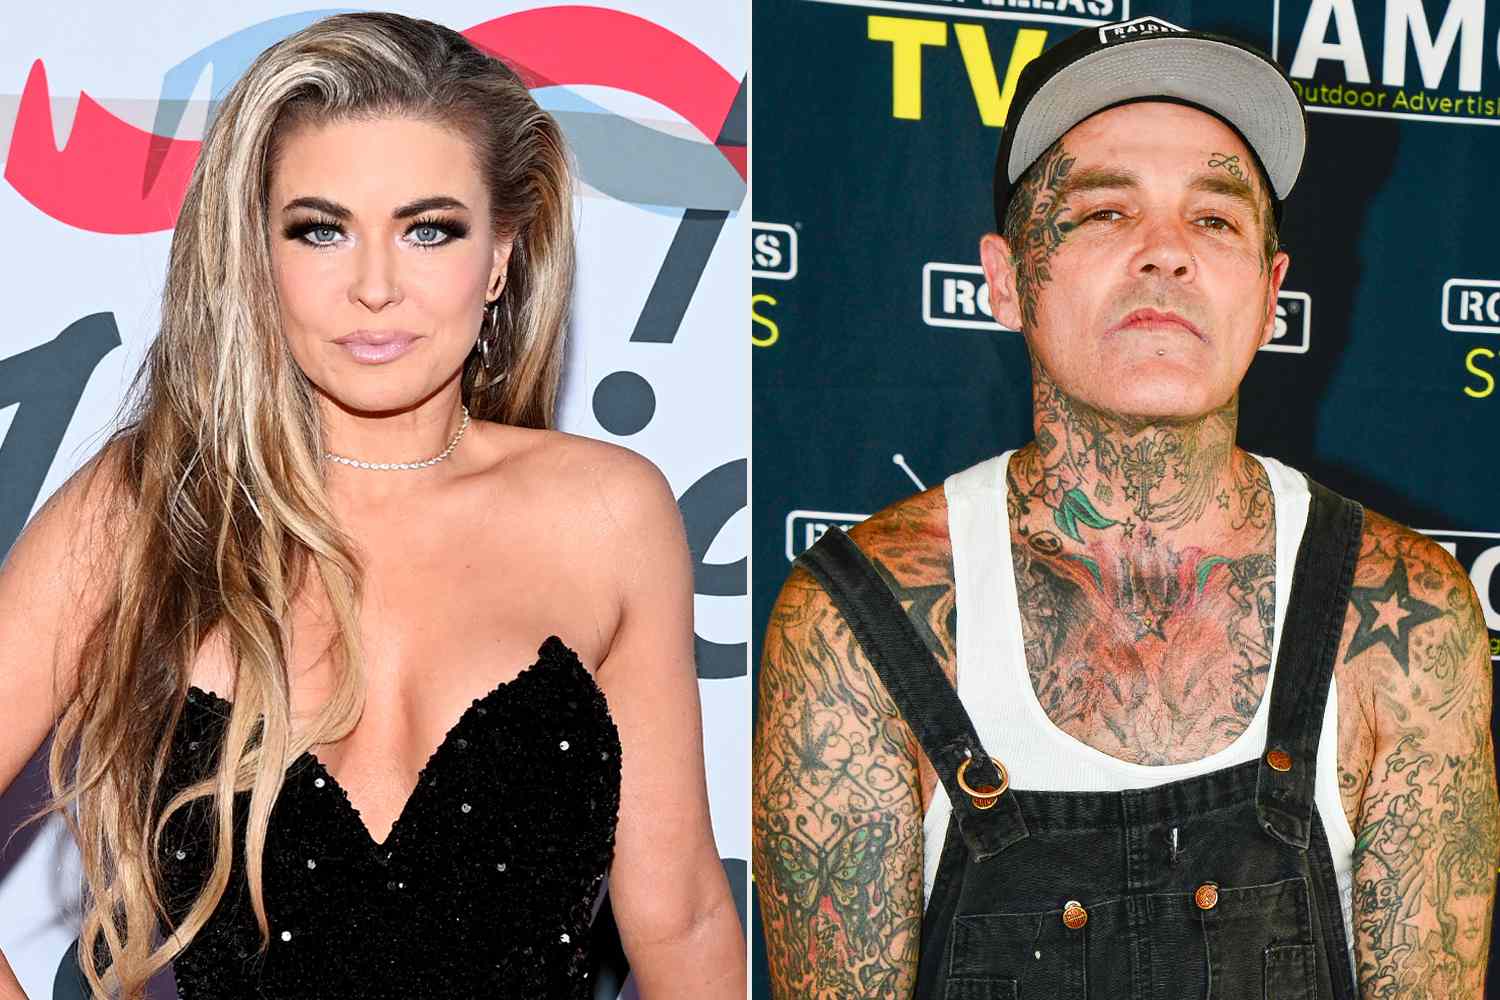 Carmen Electra Shares Memories of 'Very Kind' Friend Shifty Shellshock After His Death at 49 (Exclusive)